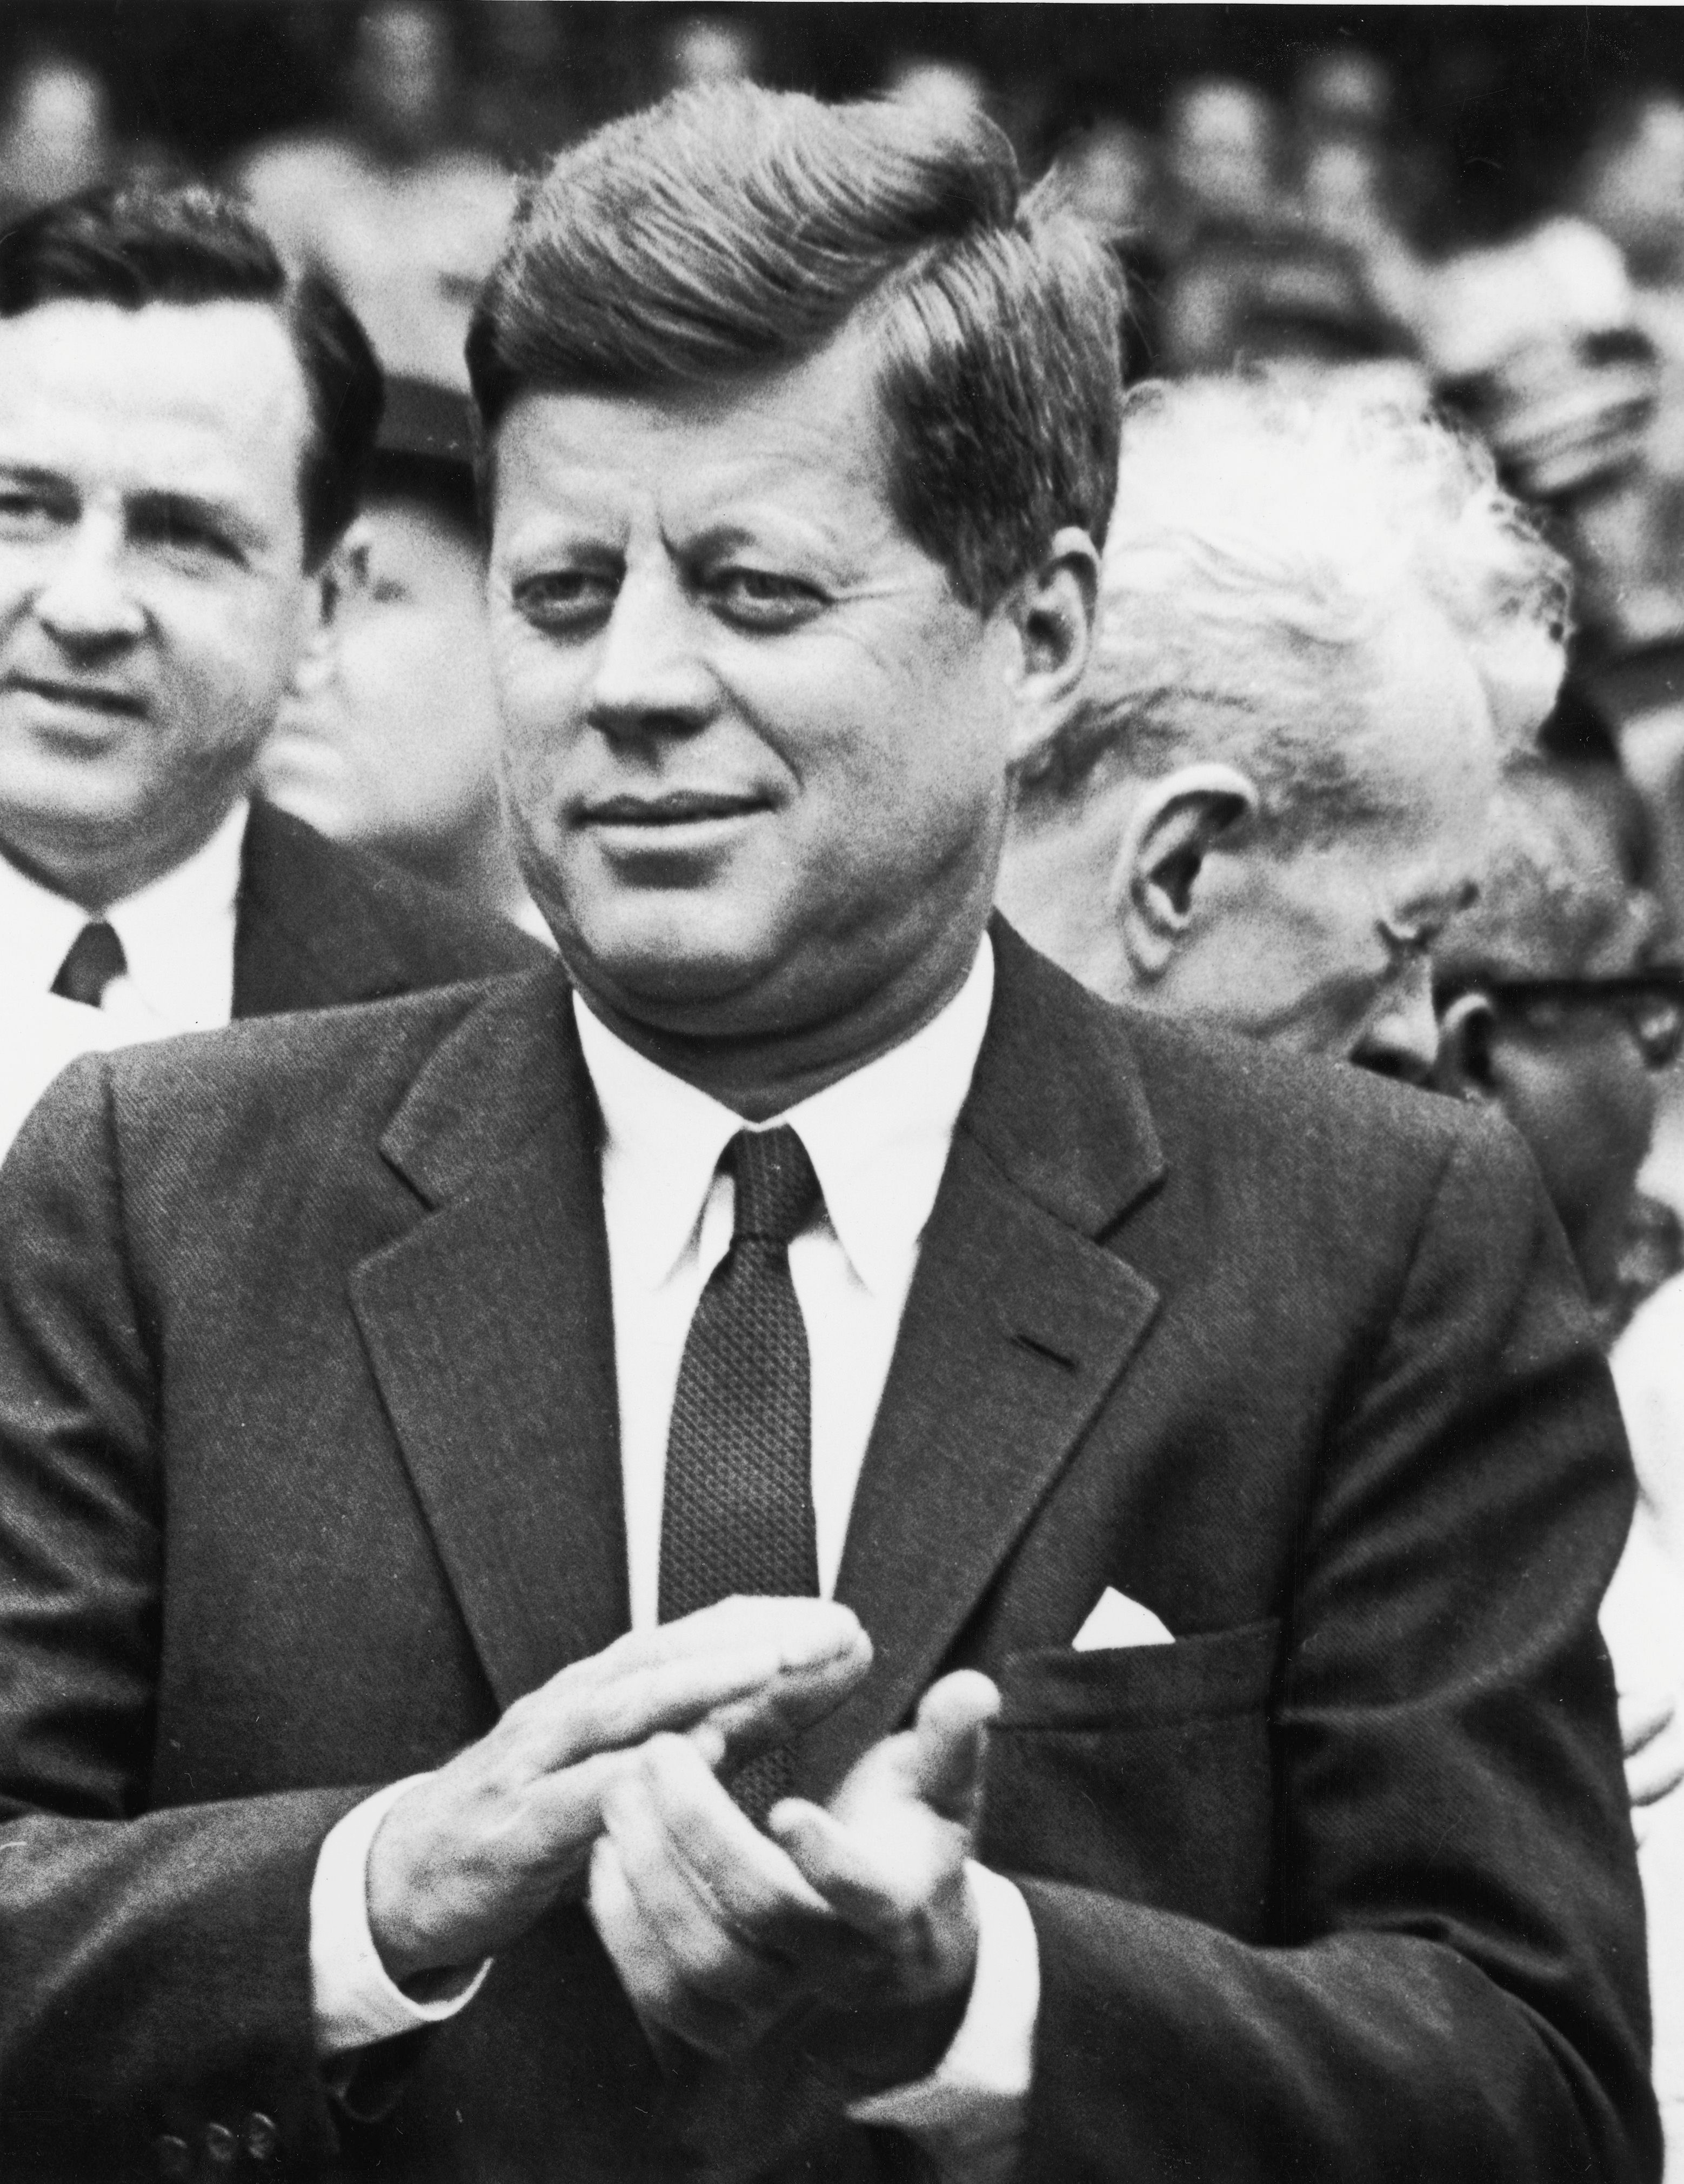 US President John F. Kennedy during a Washington Senators baseball game in Washington DC, in the early 1960s. | Source: Robert Riger/Getty Images